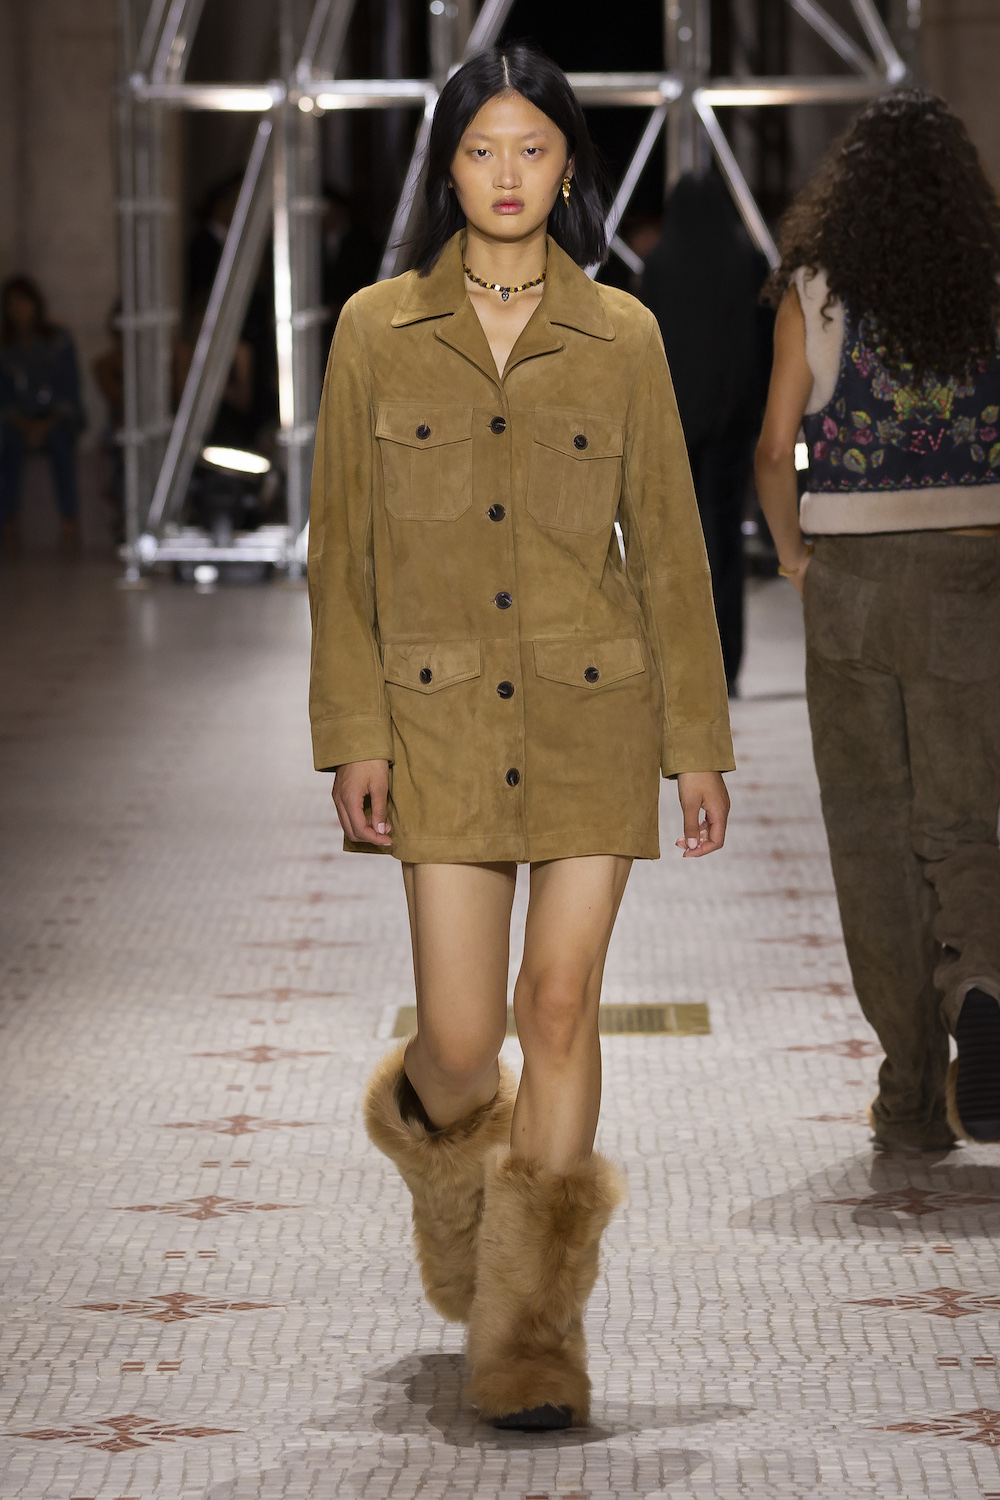  A look from the Zadig & Voltaire FW 22 show.